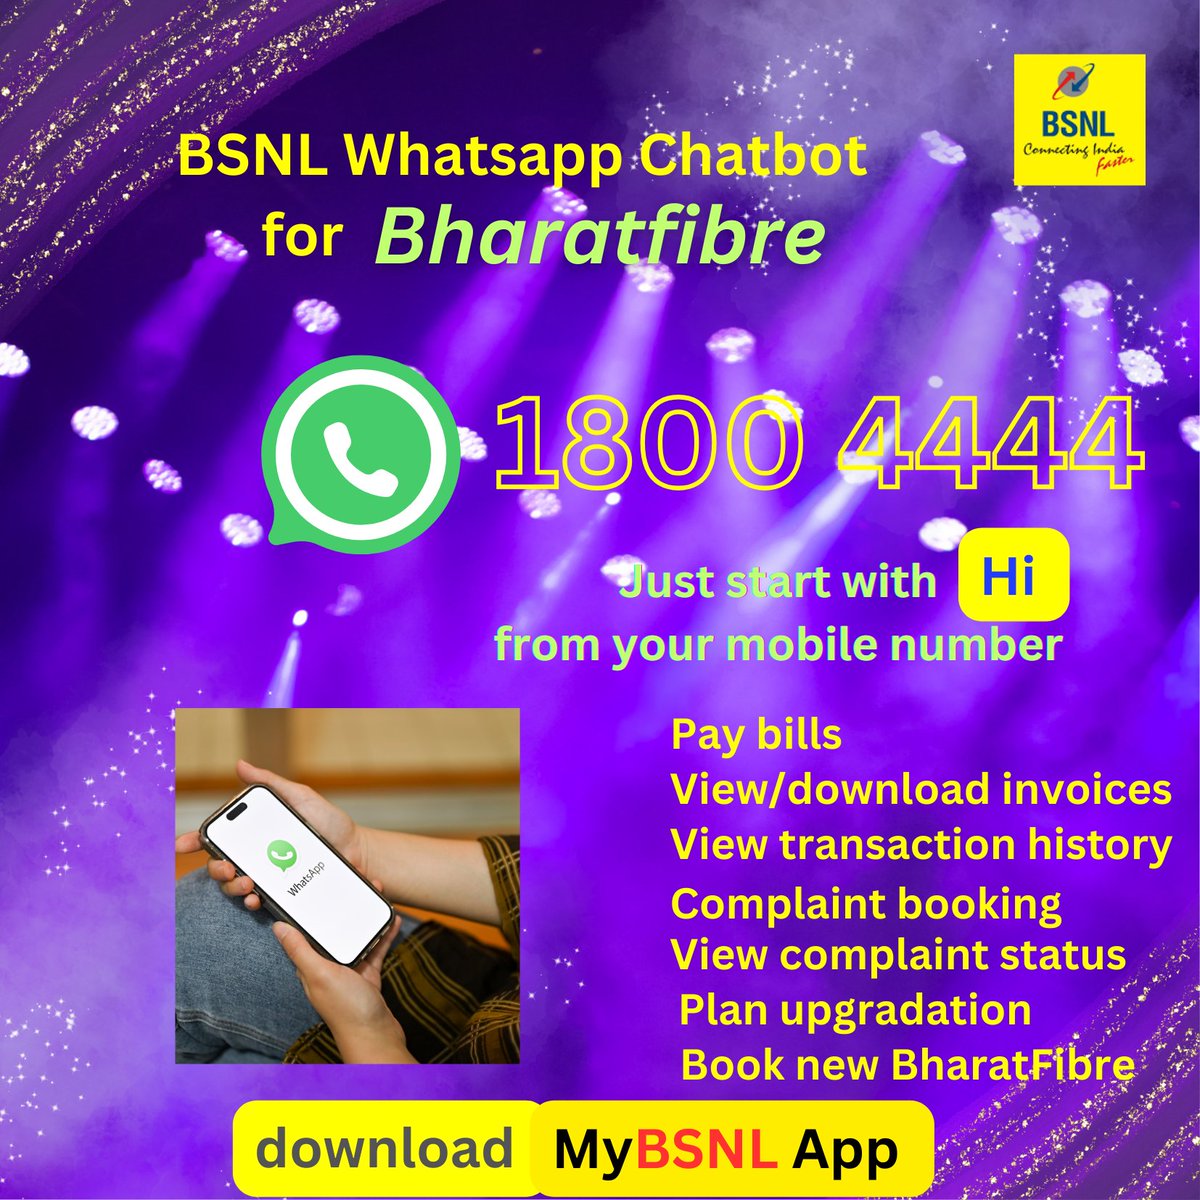 Connect with us for a seamless experience. Book your new BharatFibre connection and much more..... #BharatFiber #BSNLWhatsapp #ConnectwithBSNL #BSNLchatbot
@BSNL_RJ